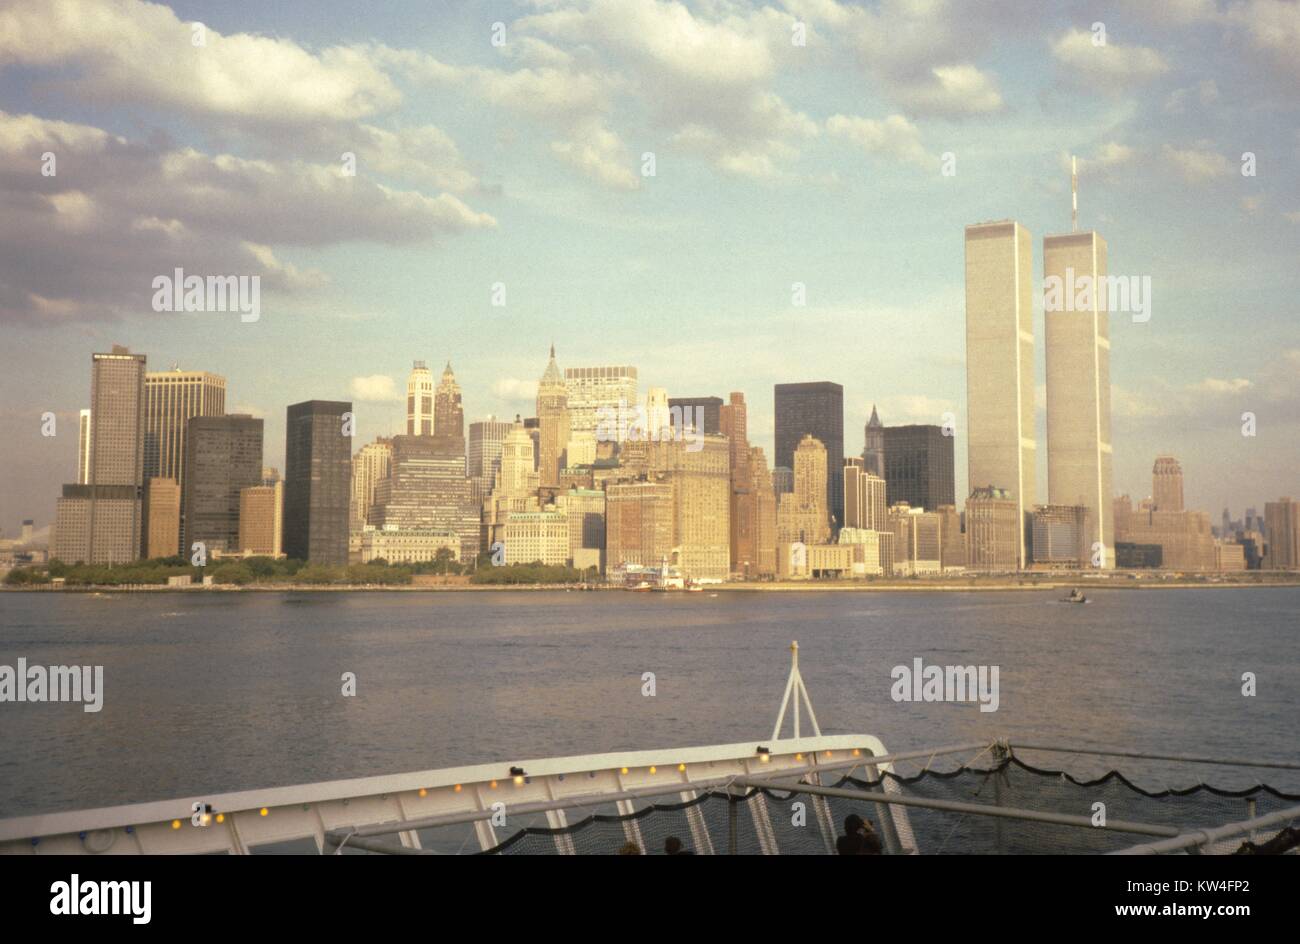 Twin towers of the World Trade Center, viewed from the aft deck of the Cunard Line's Queen Elizabeth 2 cruise ship in New York Harbor, New York City, New York, 1975. Stock Photo